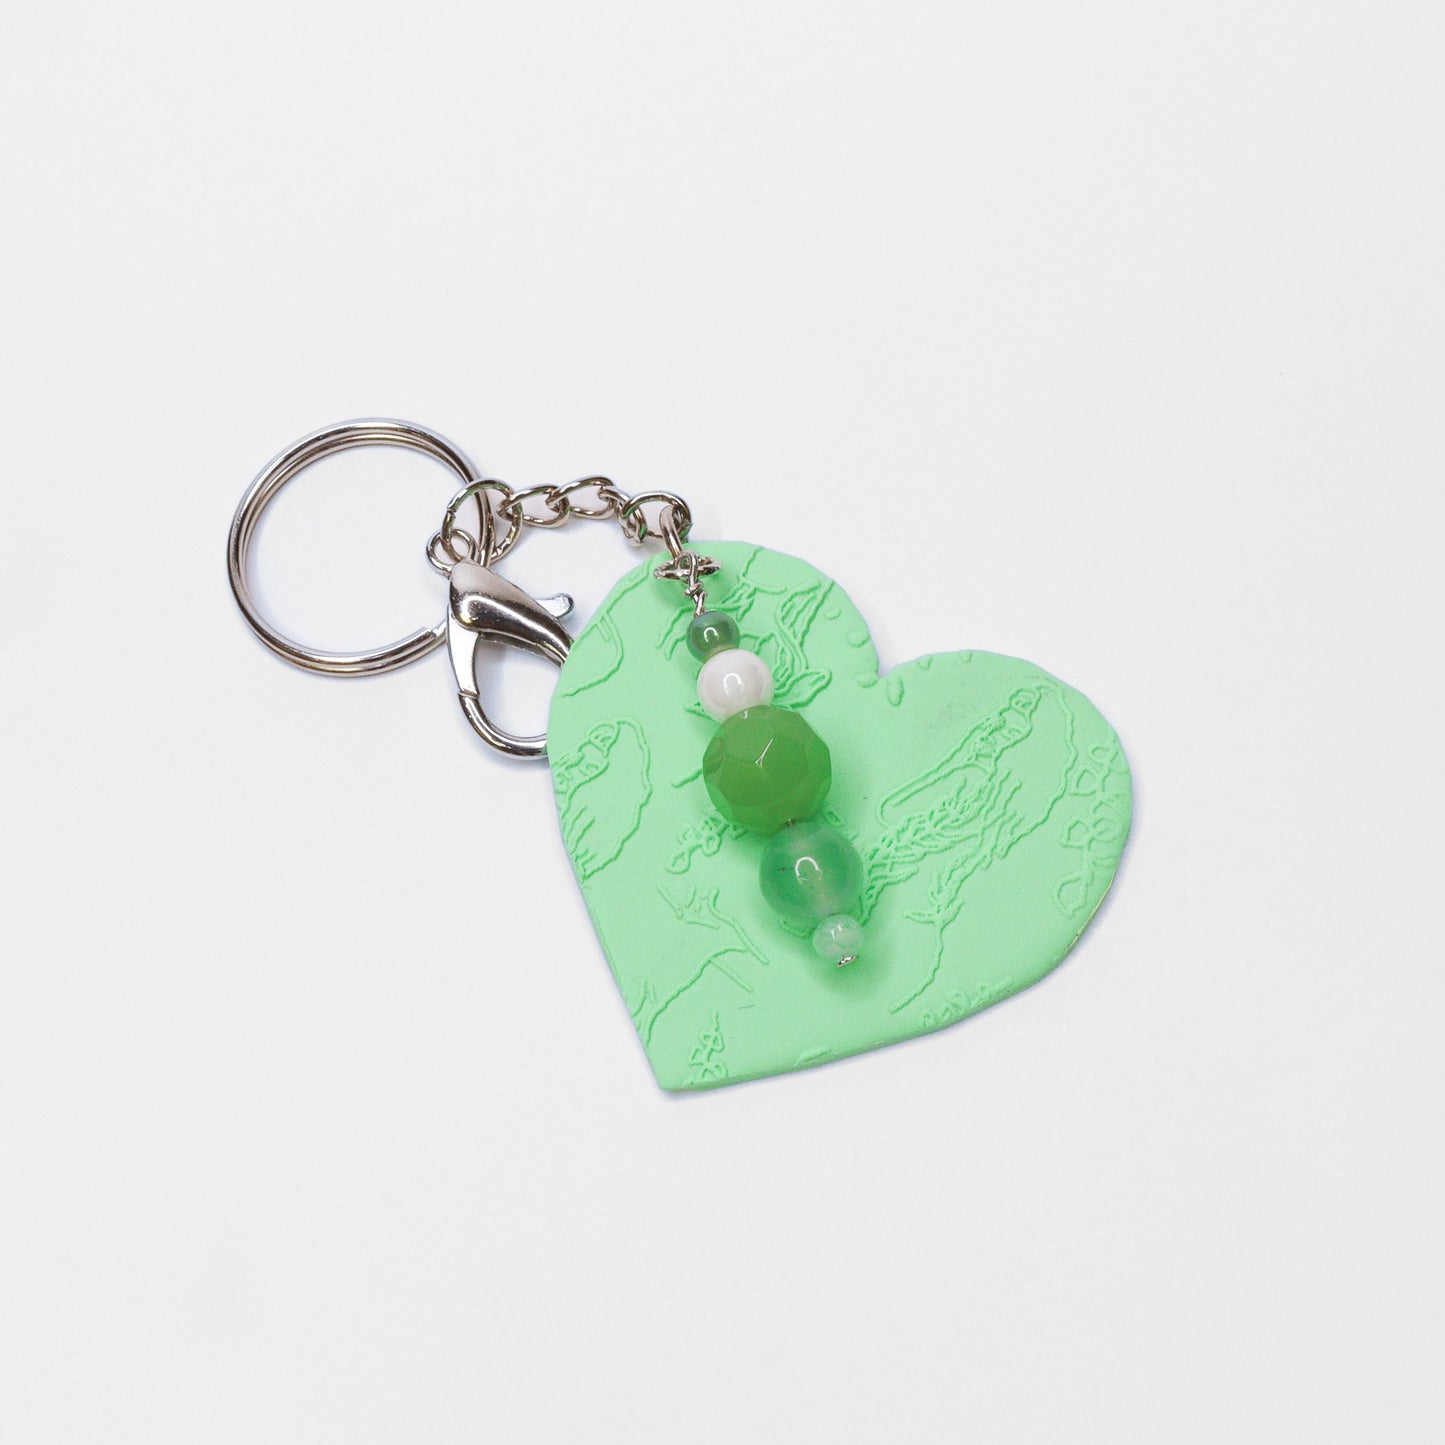 Sweetheart Keychains - Choose Your Color